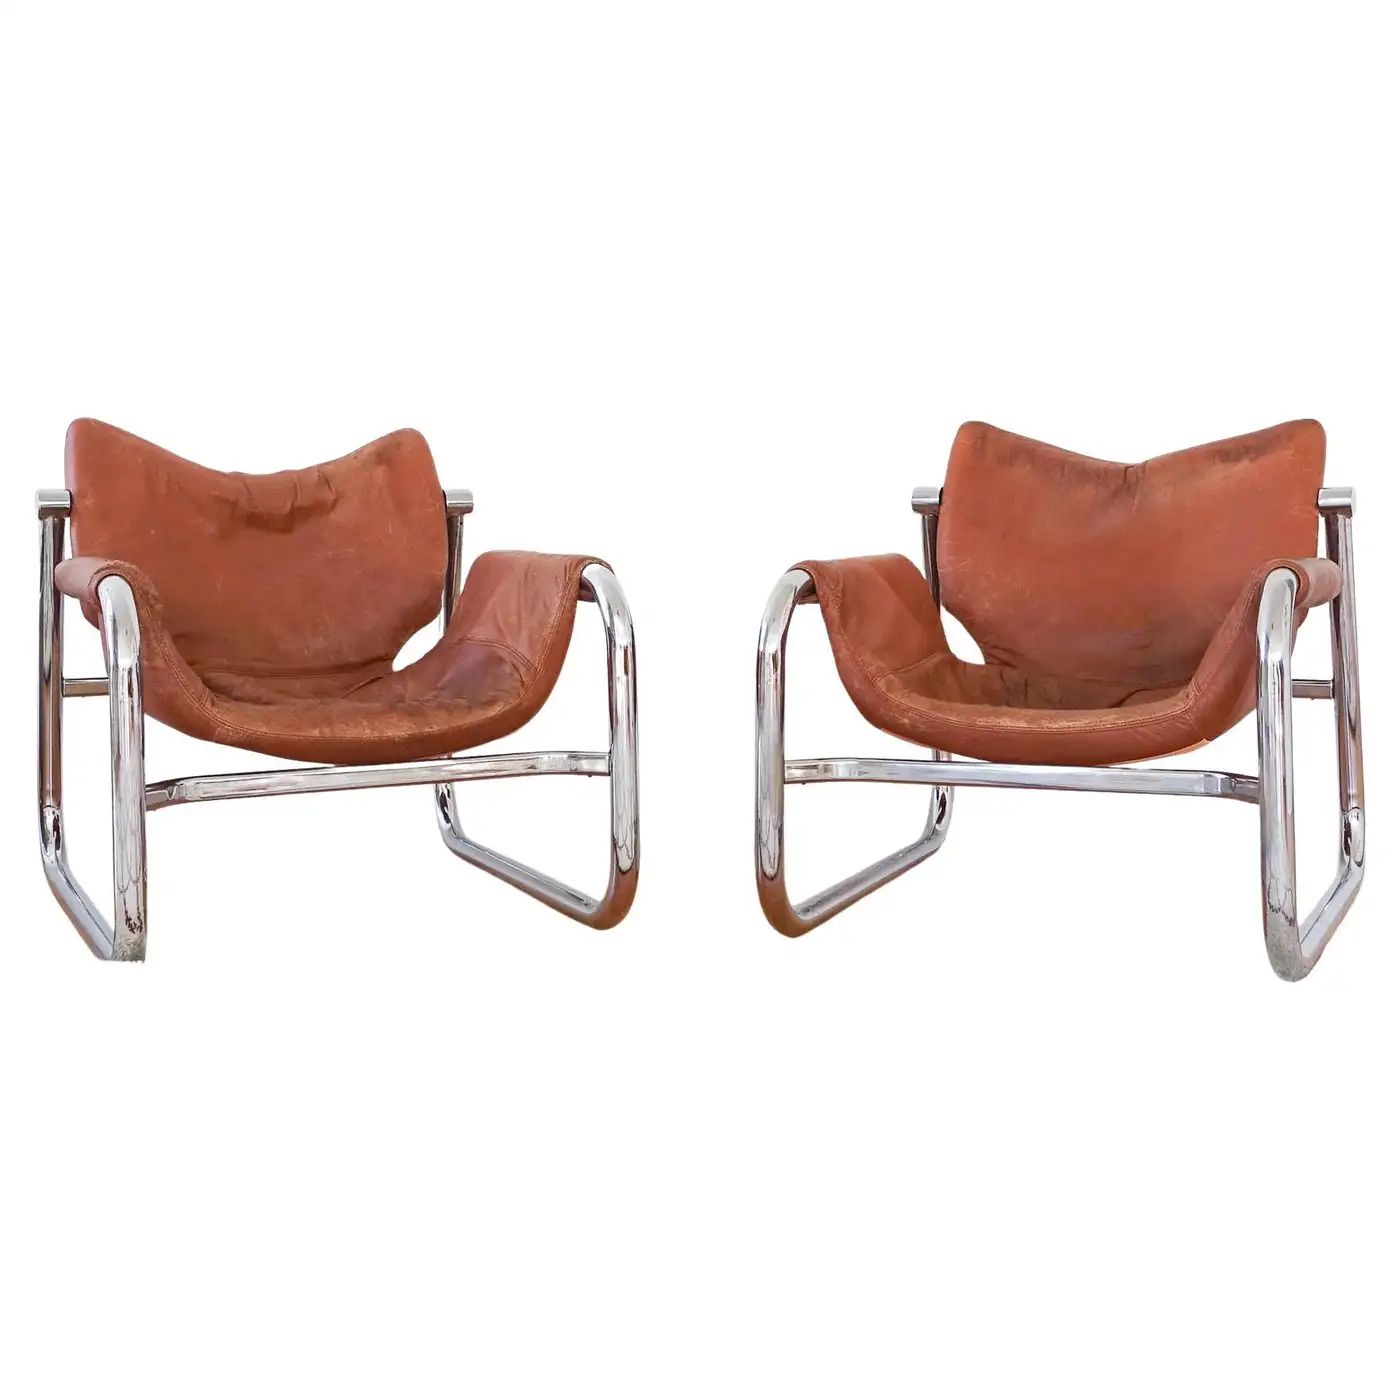 Pair of Alpha Lounge Chair by Maurice Burke for Pozza, Brazil, 1960s | 1stDibs